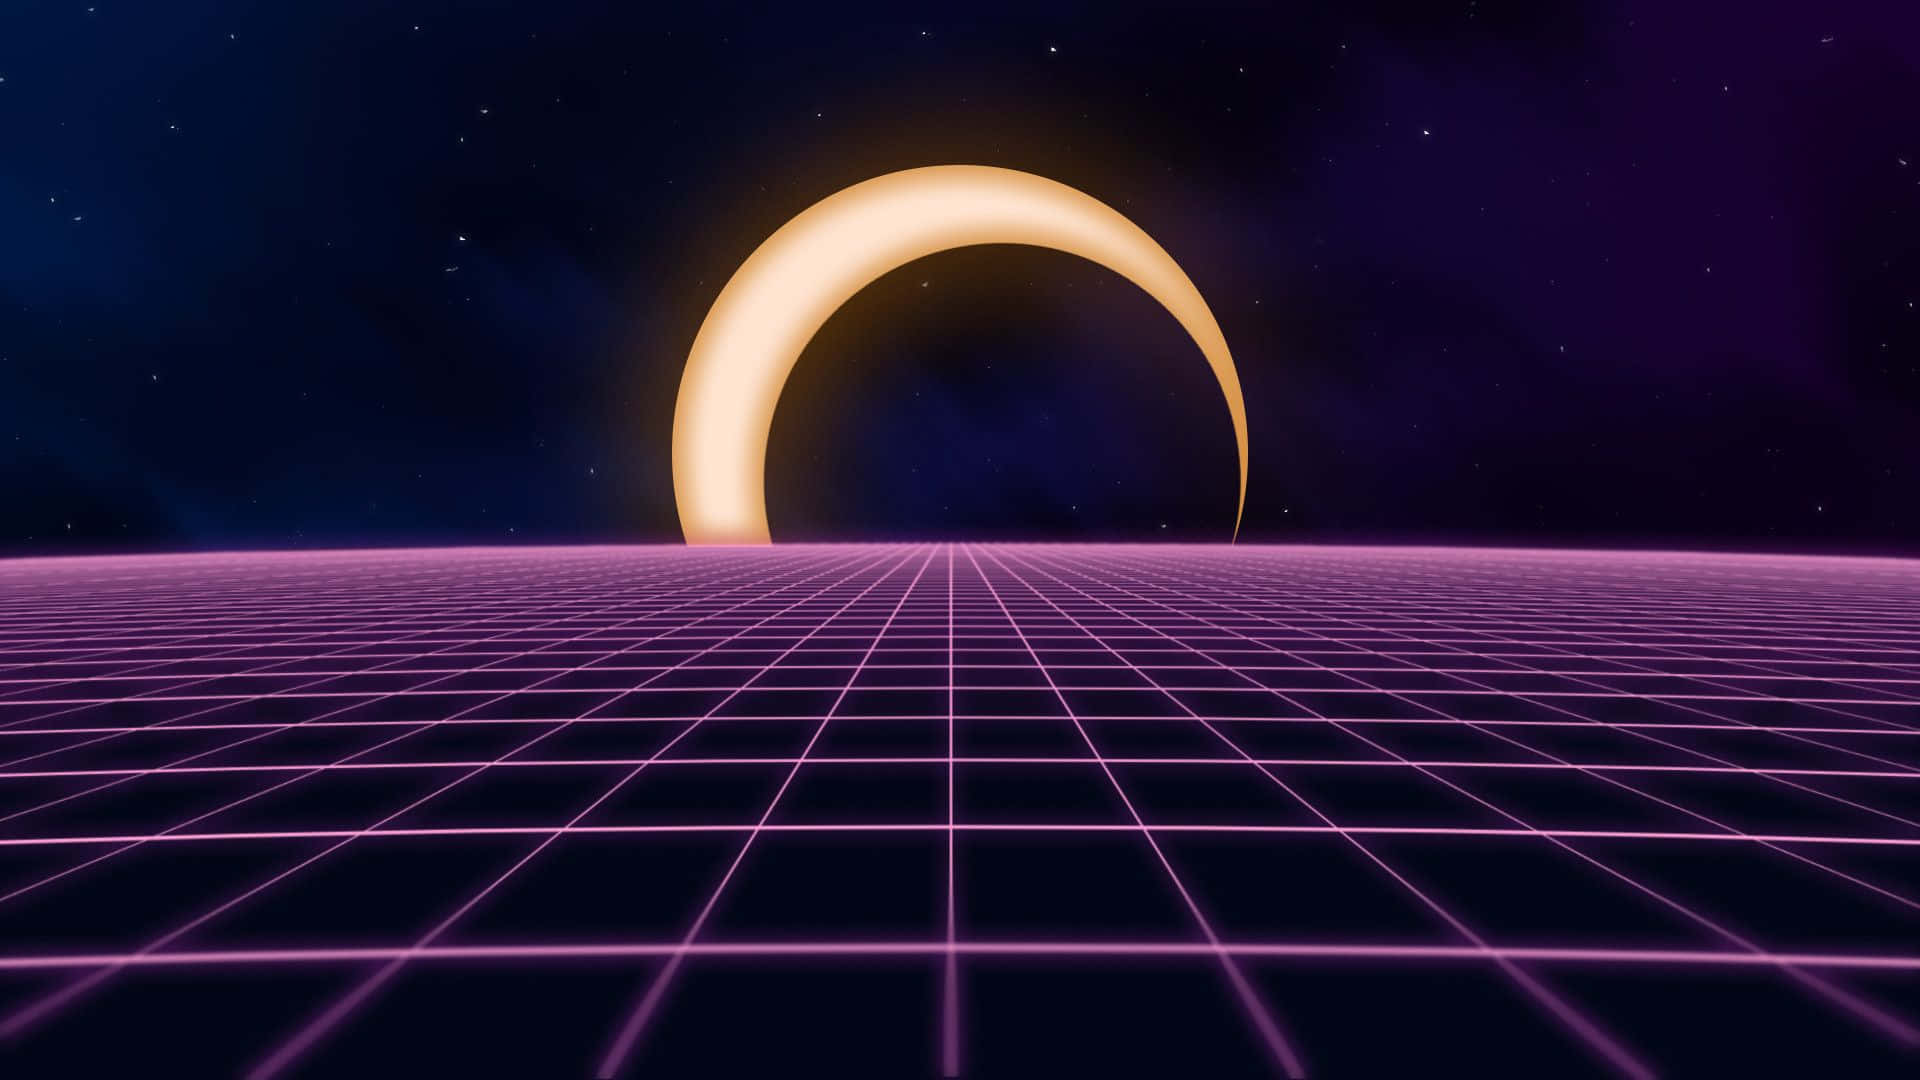 A Purple And Pink Spiral In The Sky Wallpaper